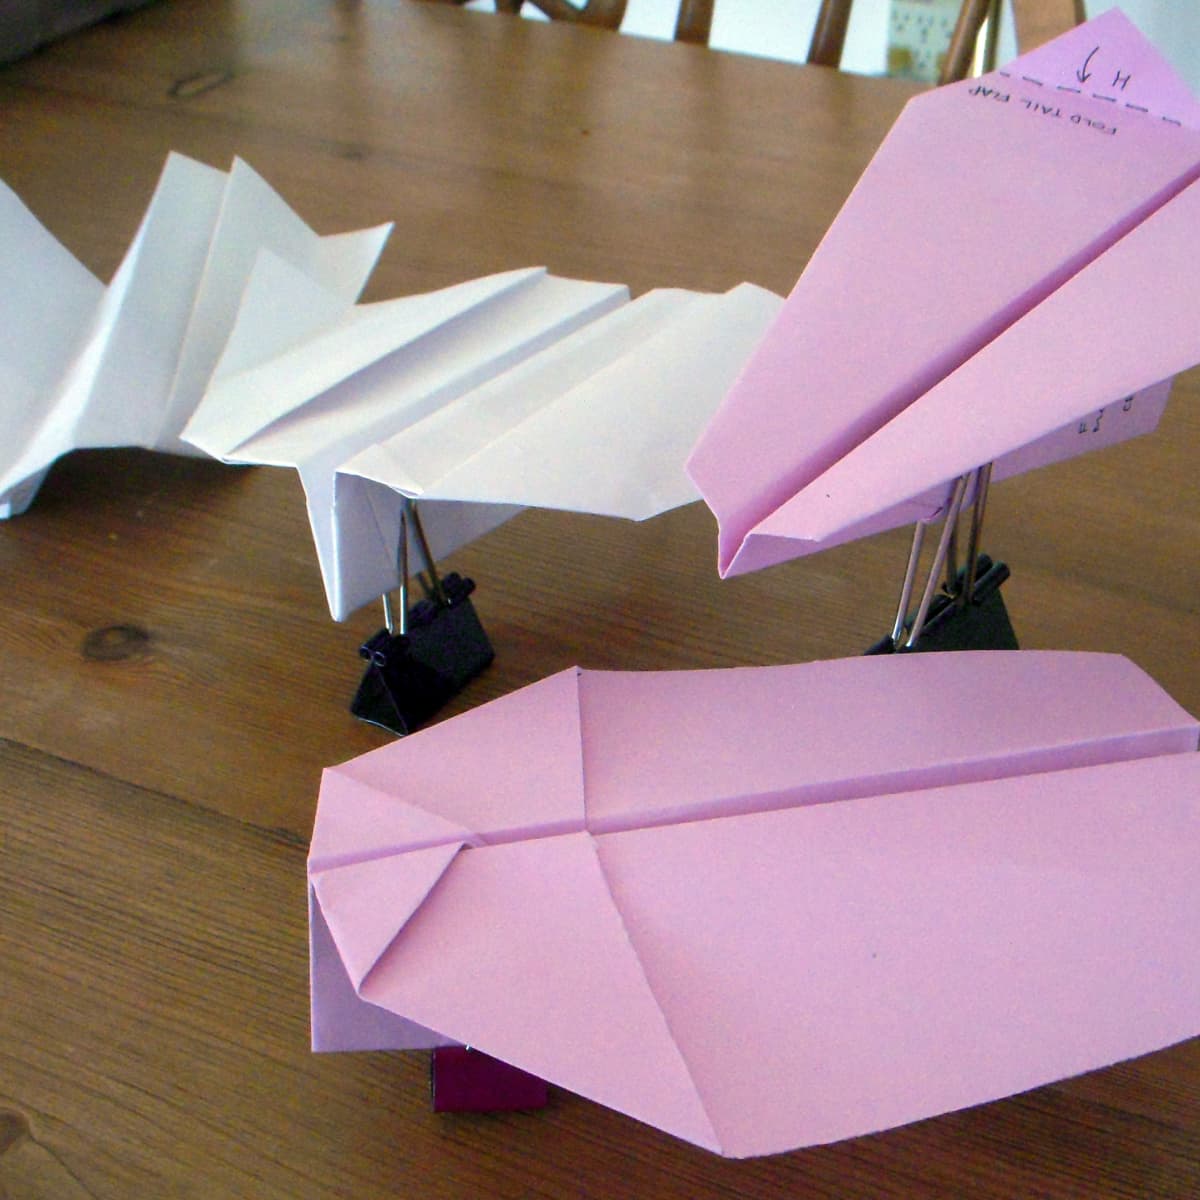 origami paper airplane instructions